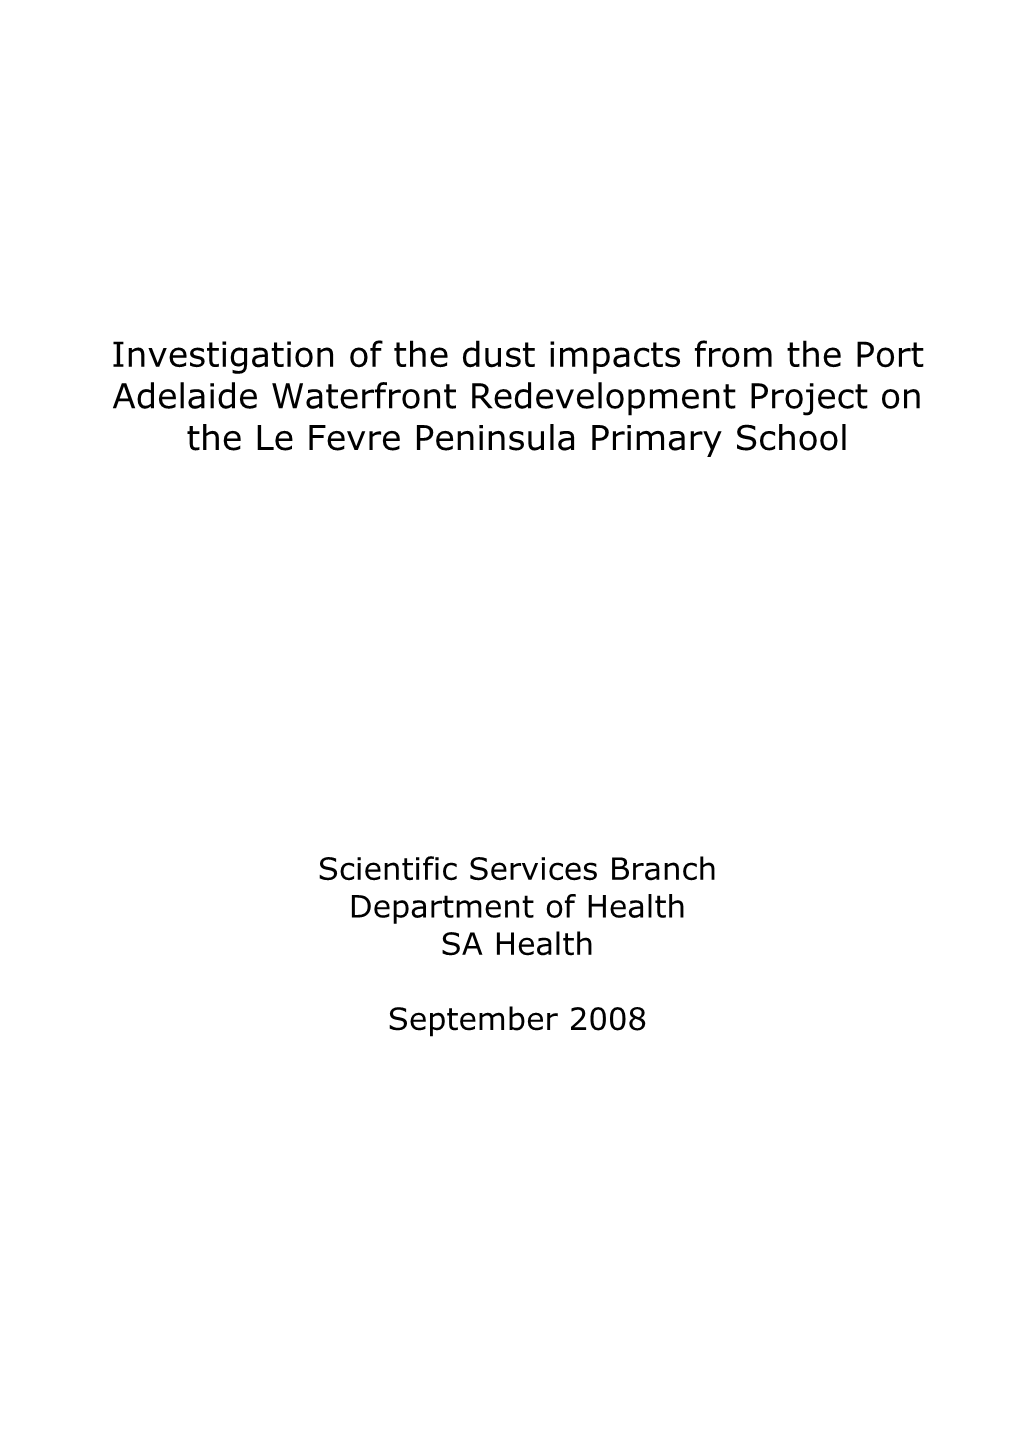 Investigation of the Dust Impacts from the Port Adelaide Waterfront Redevelopment Project on the Le Fevre Peninsula Primary School